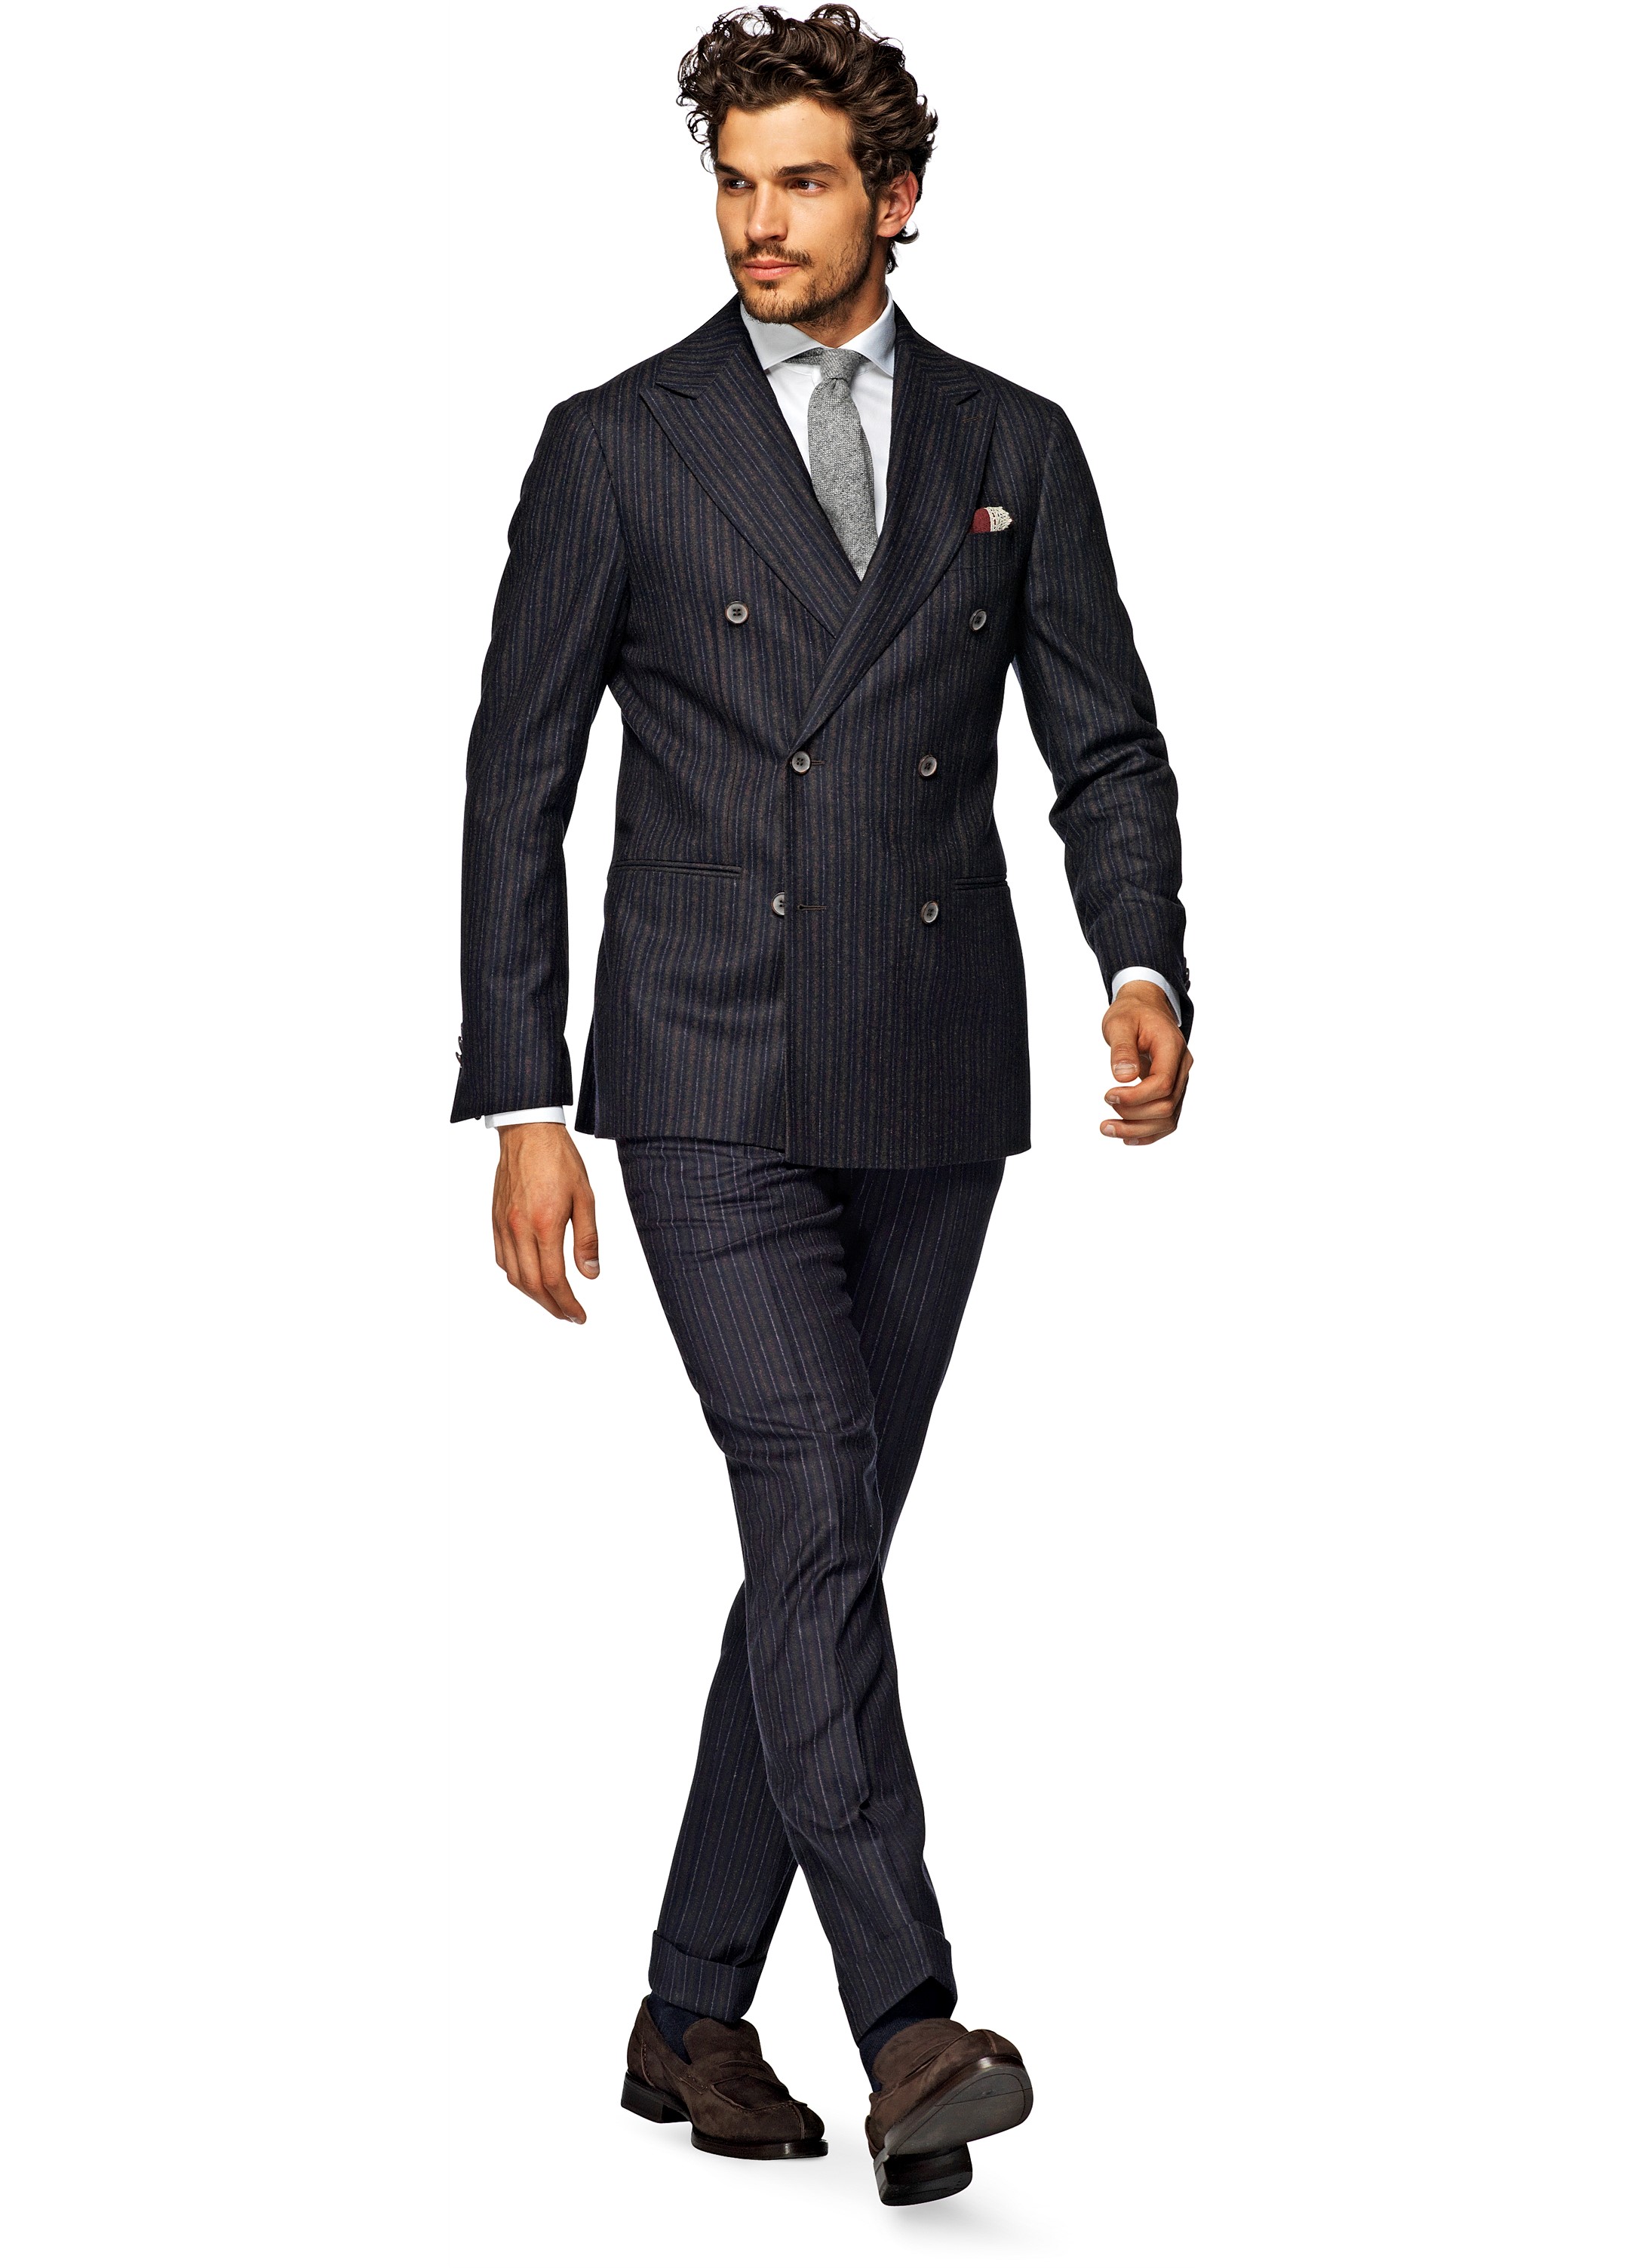 Suits_Navy_Stripe_Soho_P3937_Suitsupply_Online_Store_1.jpg